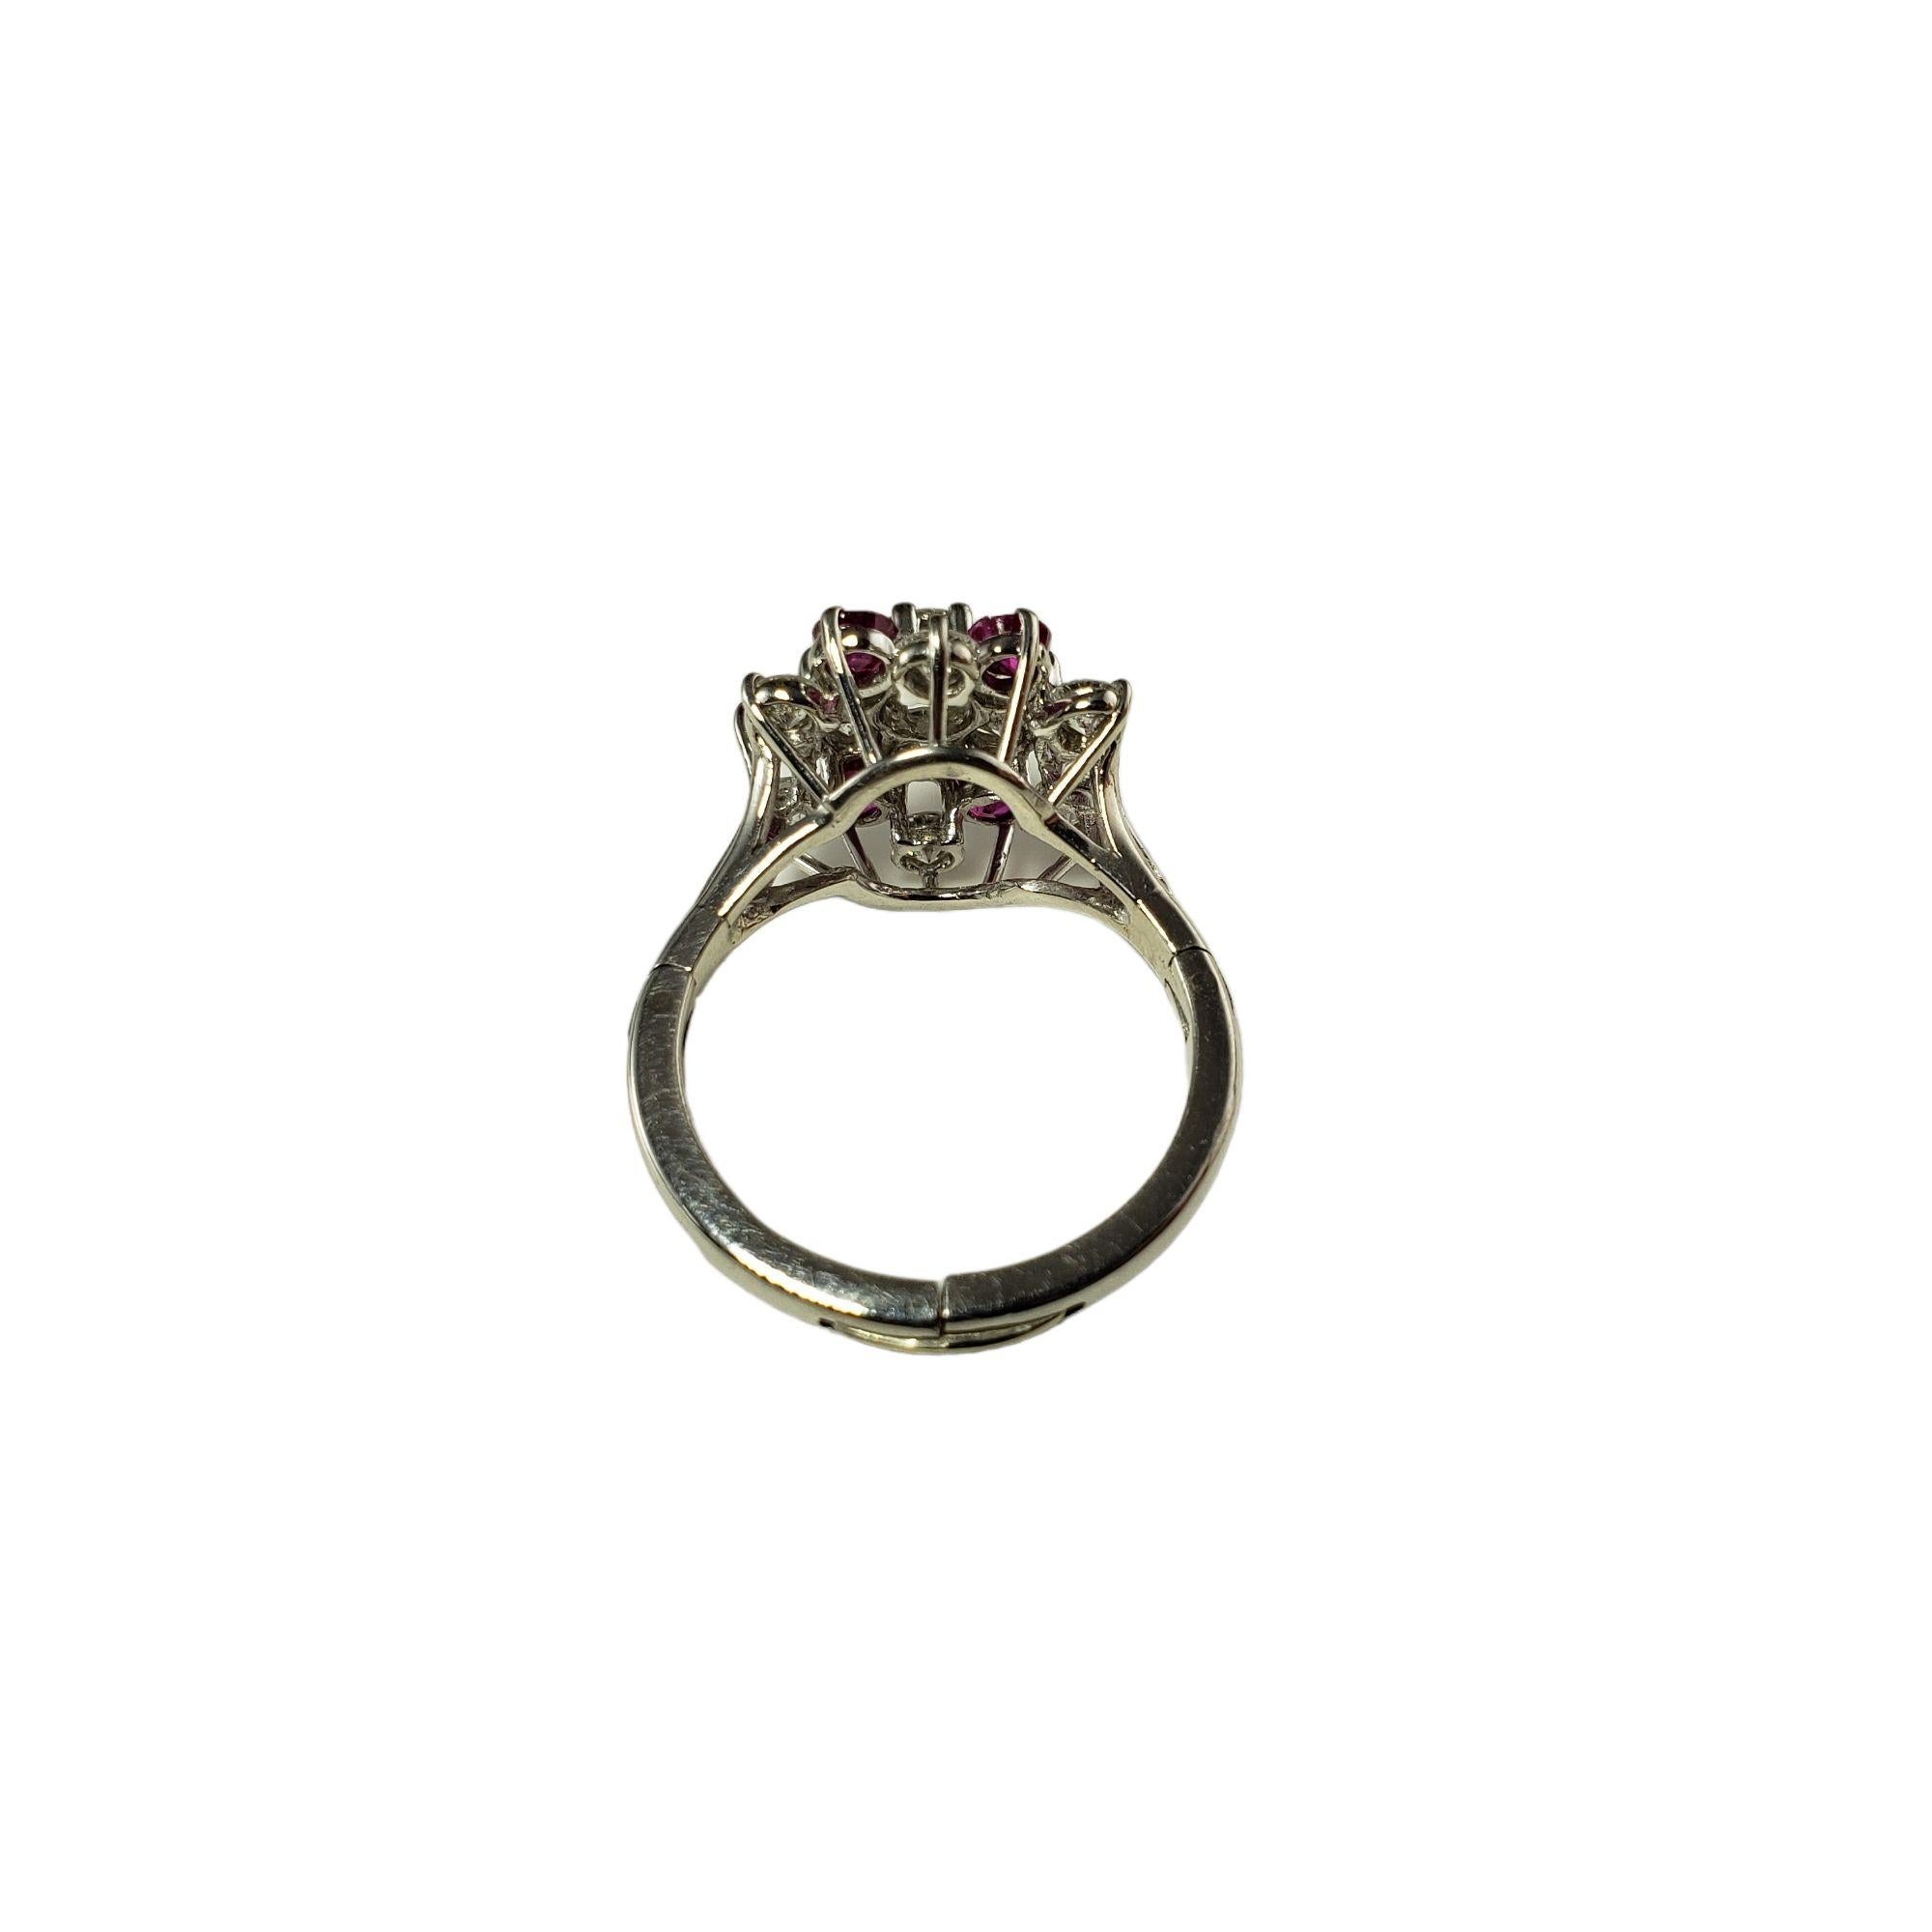 Vintage Platinum Ruby and Diamond Expandable Ring Size 7.75 JAGi Certified-

This stunning ring features 13 round brilliant cut diamonds and six natural rubies set in beautifully detailed platinum. The shank of the ring opens to fit over knuckle